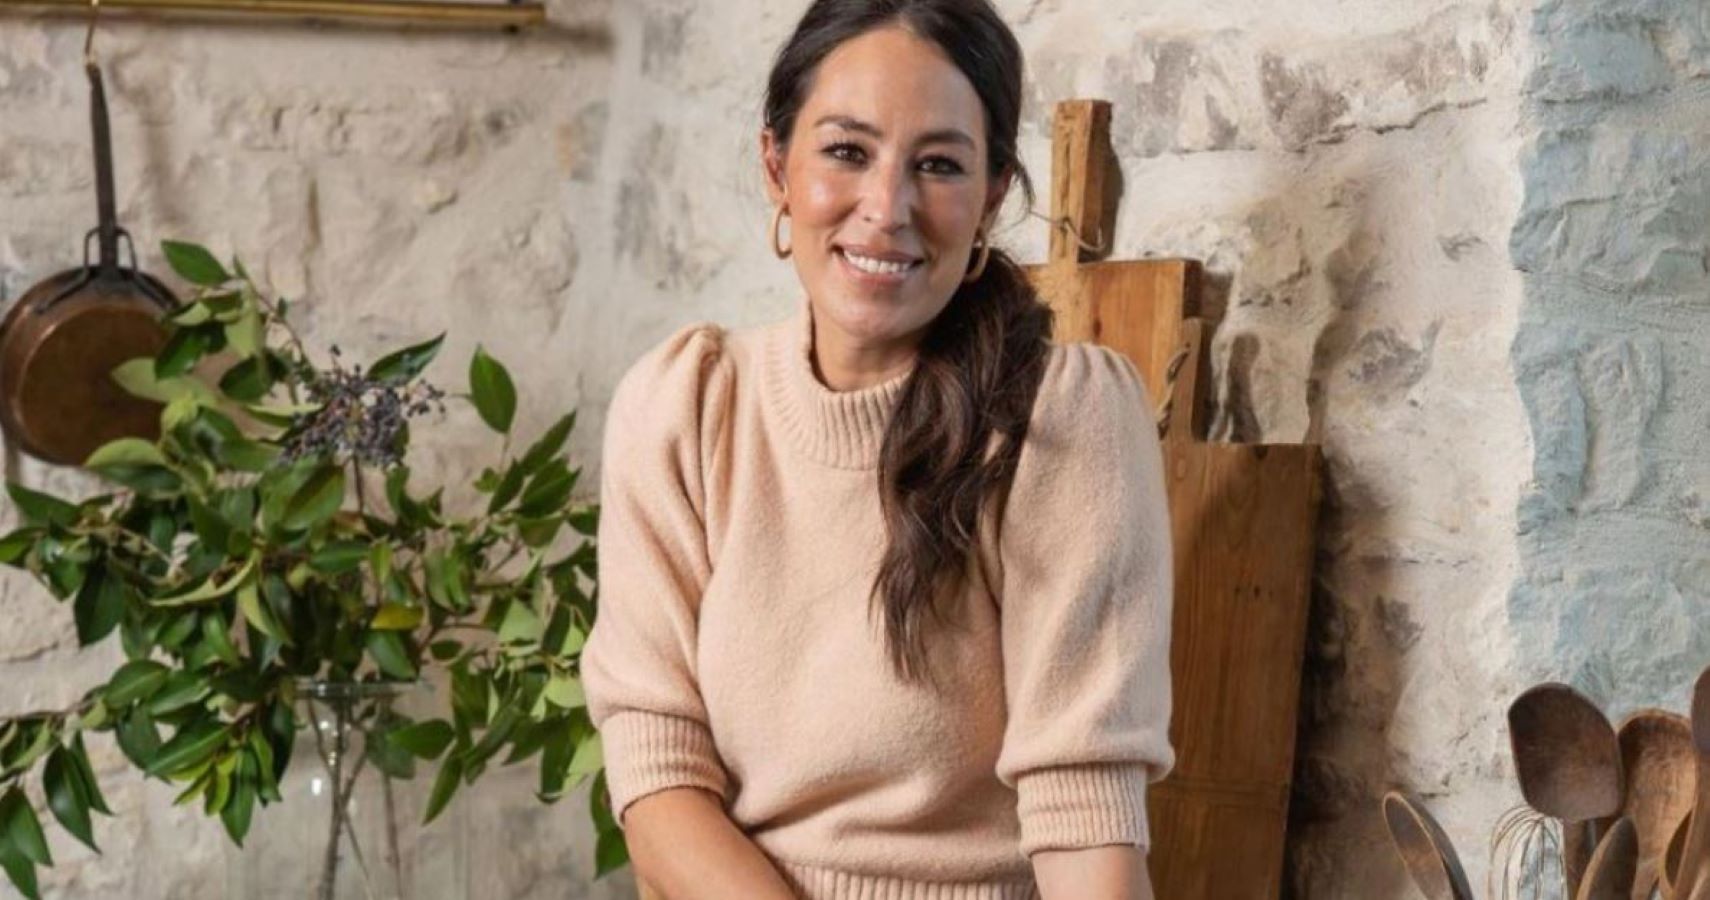 Joanna Gaines Discusses Message Behind Her Second Children’s Book